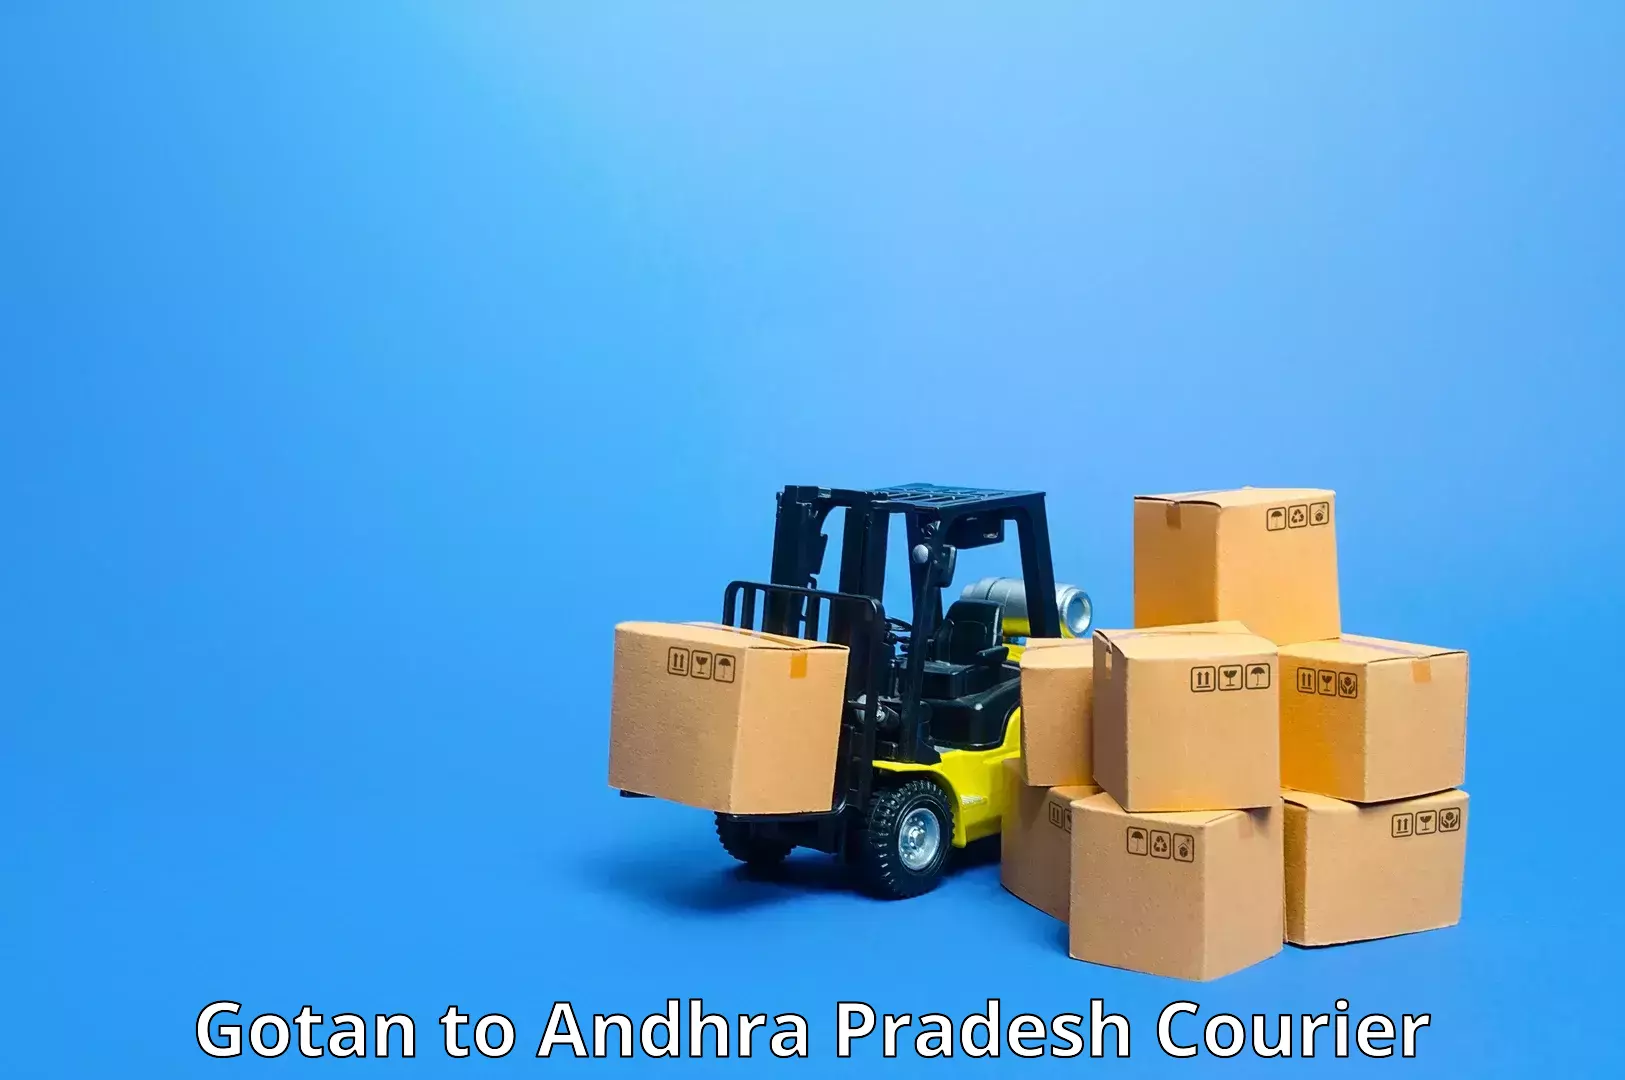 Package delivery network Gotan to Anakapalli